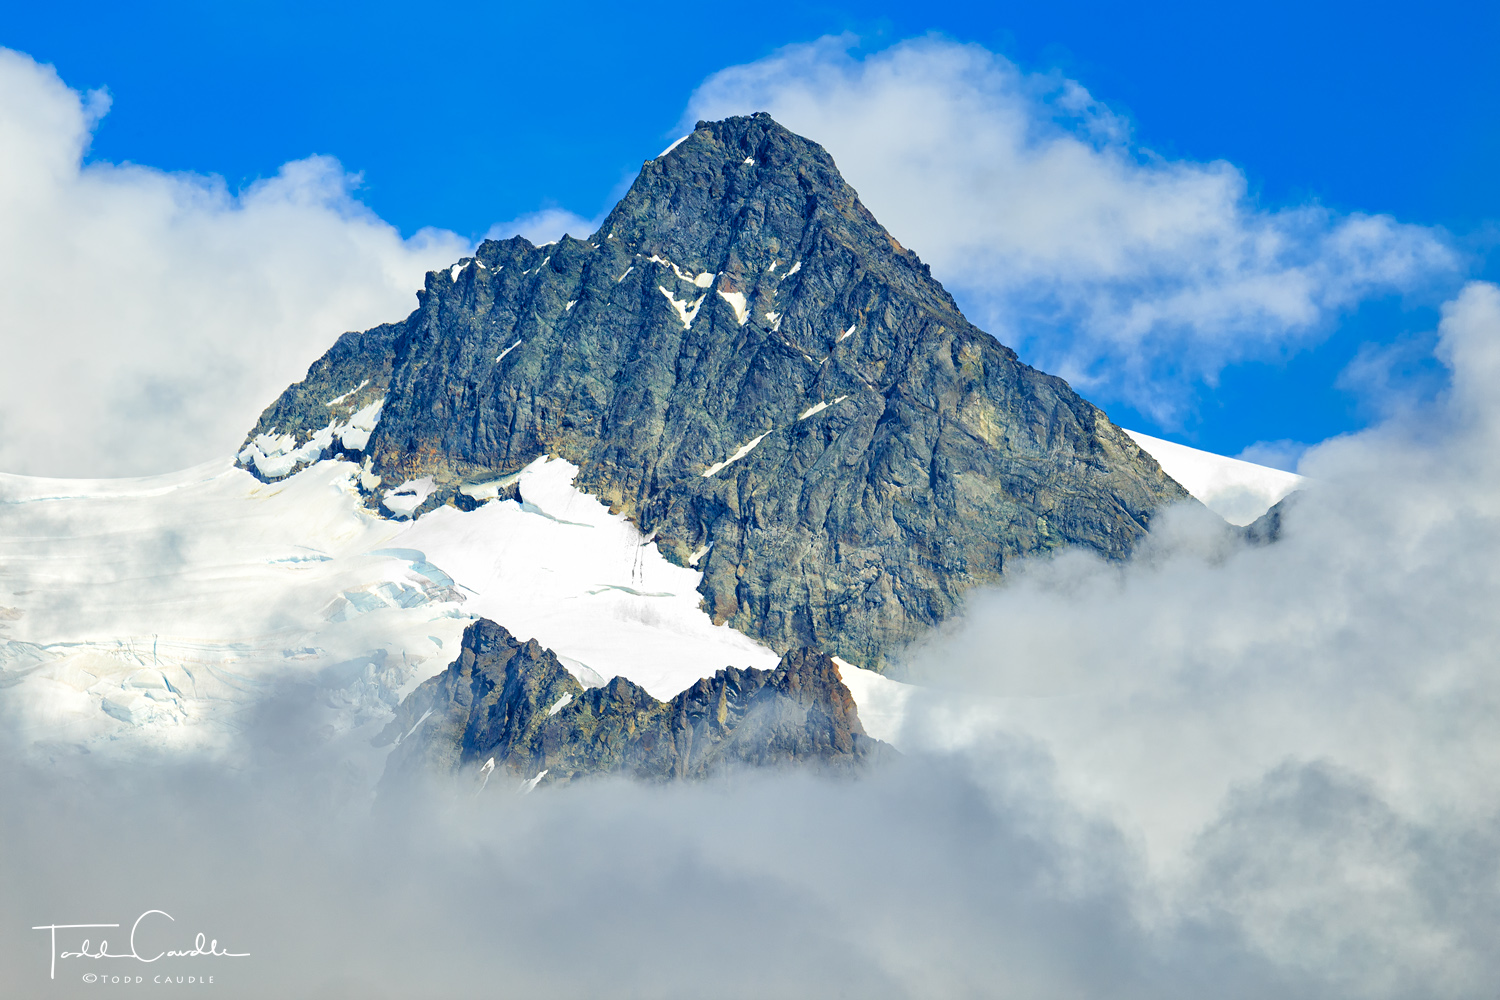 After hiding in the clouds for most of two days, Mount Shuksan's summit pyramid reveals itself.